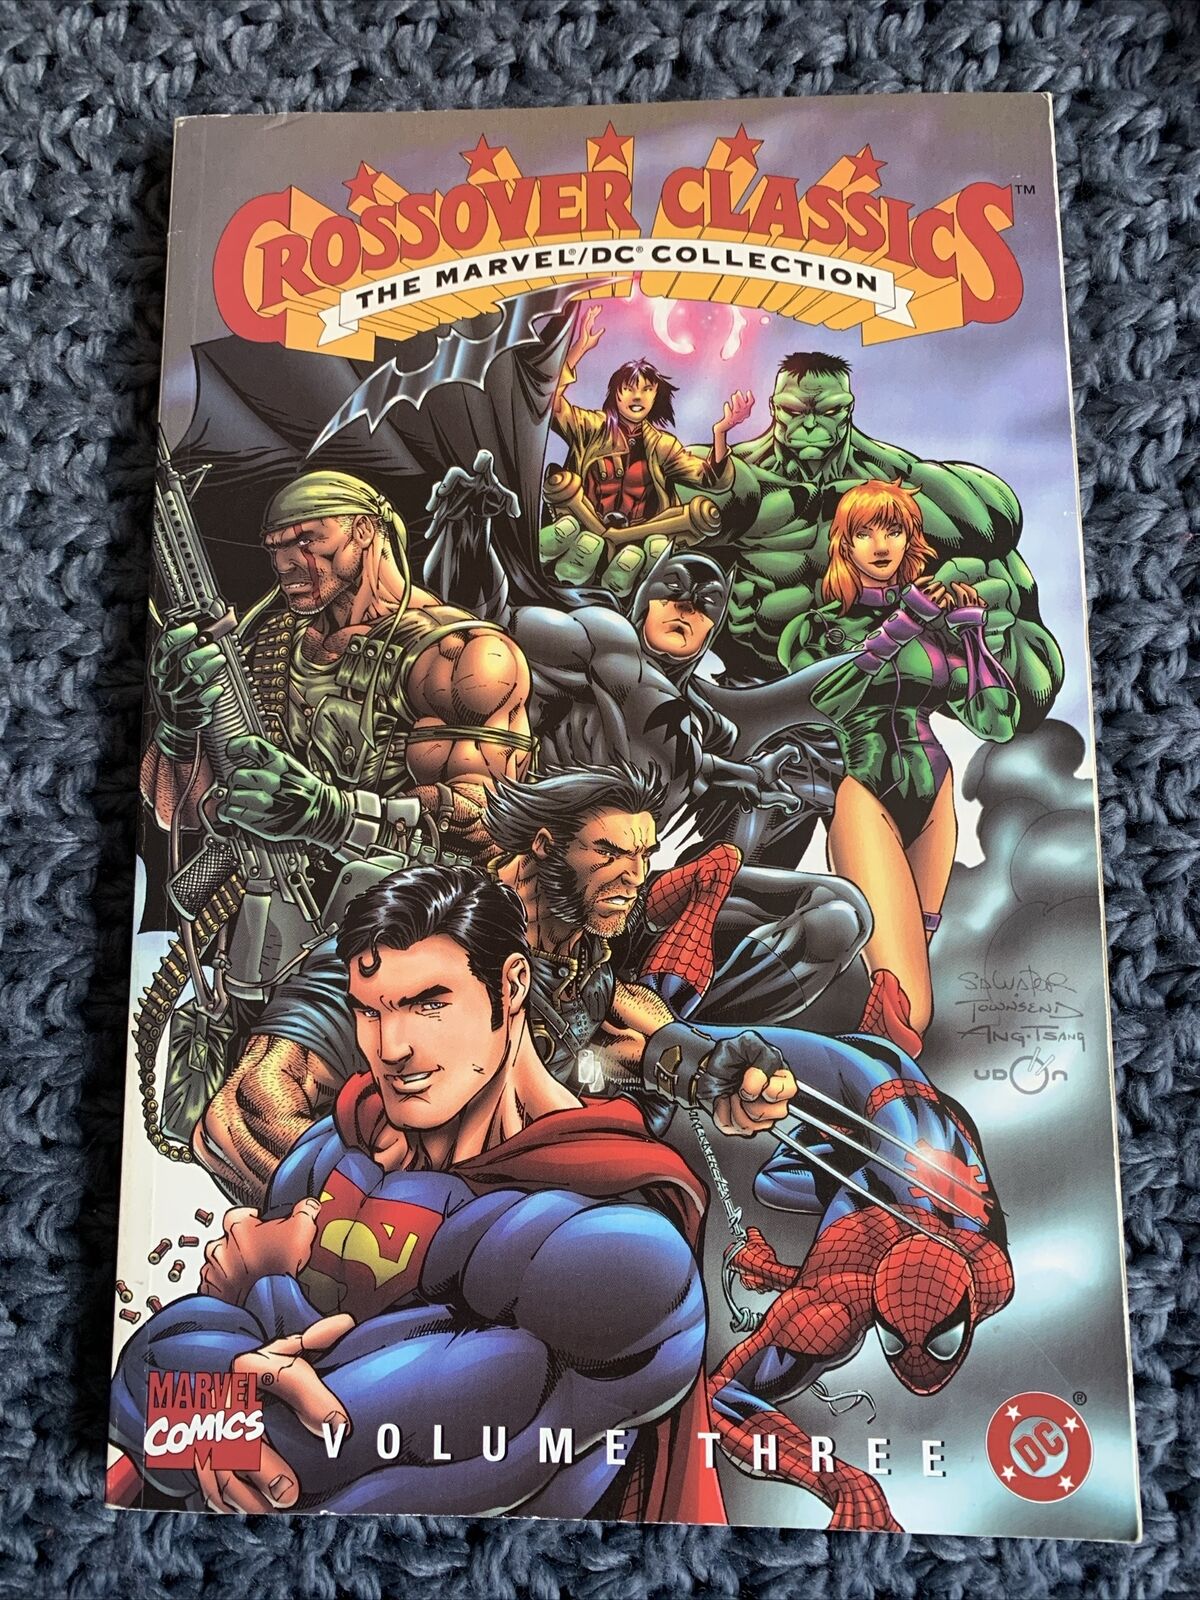 Crossover Classics The Marvel/DC Collection Volume Three - Marvel / DC